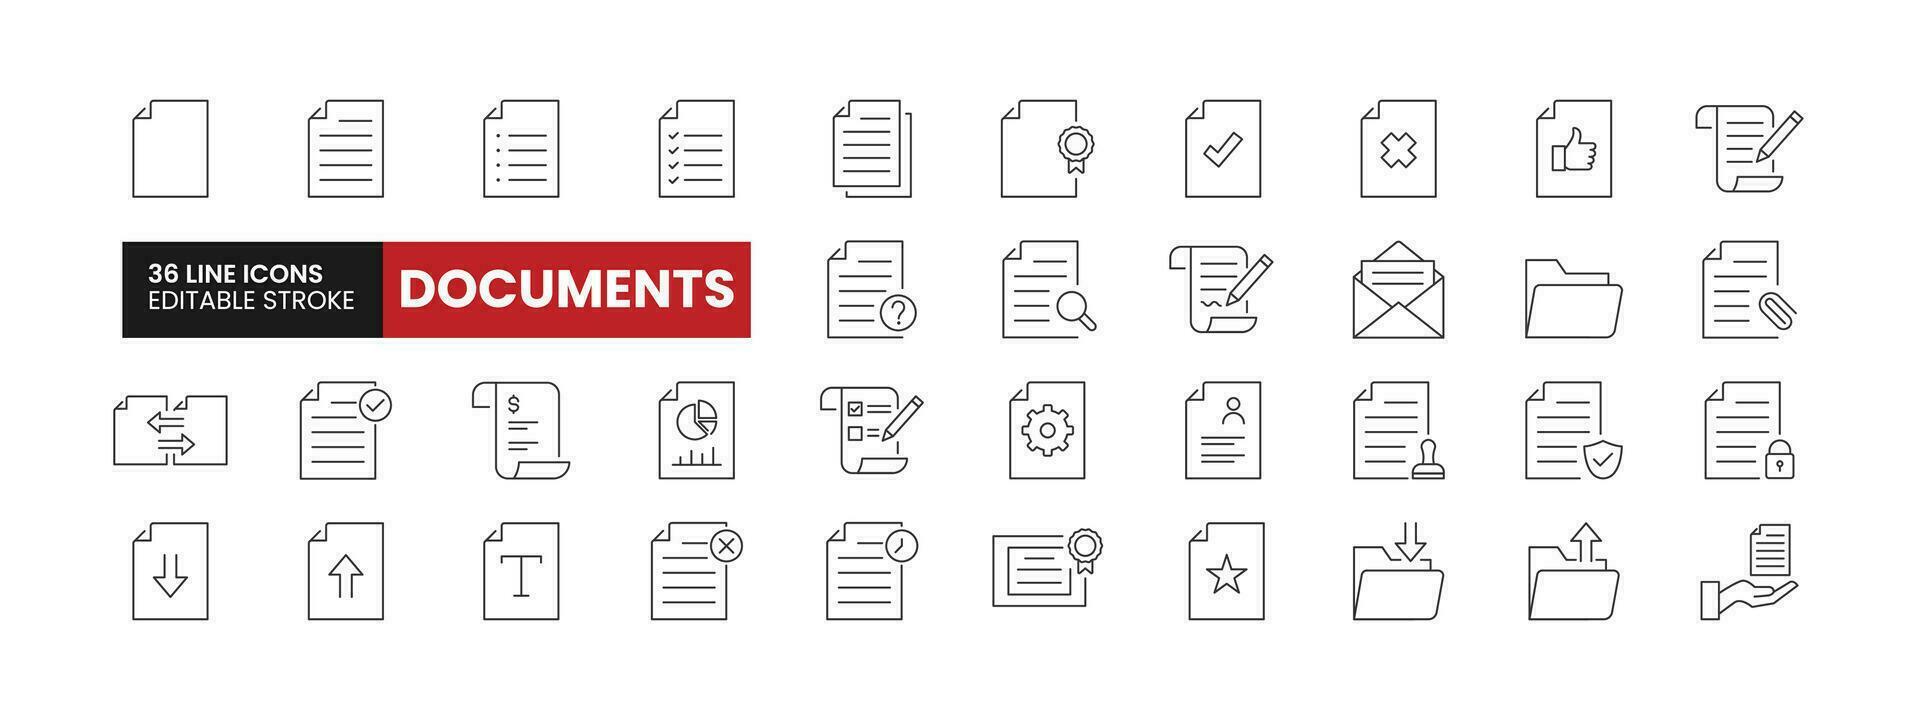 Set of 36 Documents line icons set. Documents outline icons with editable stroke collection. Includes Document Files, Upload, Download, Receipt, Document Approval, and More. vector